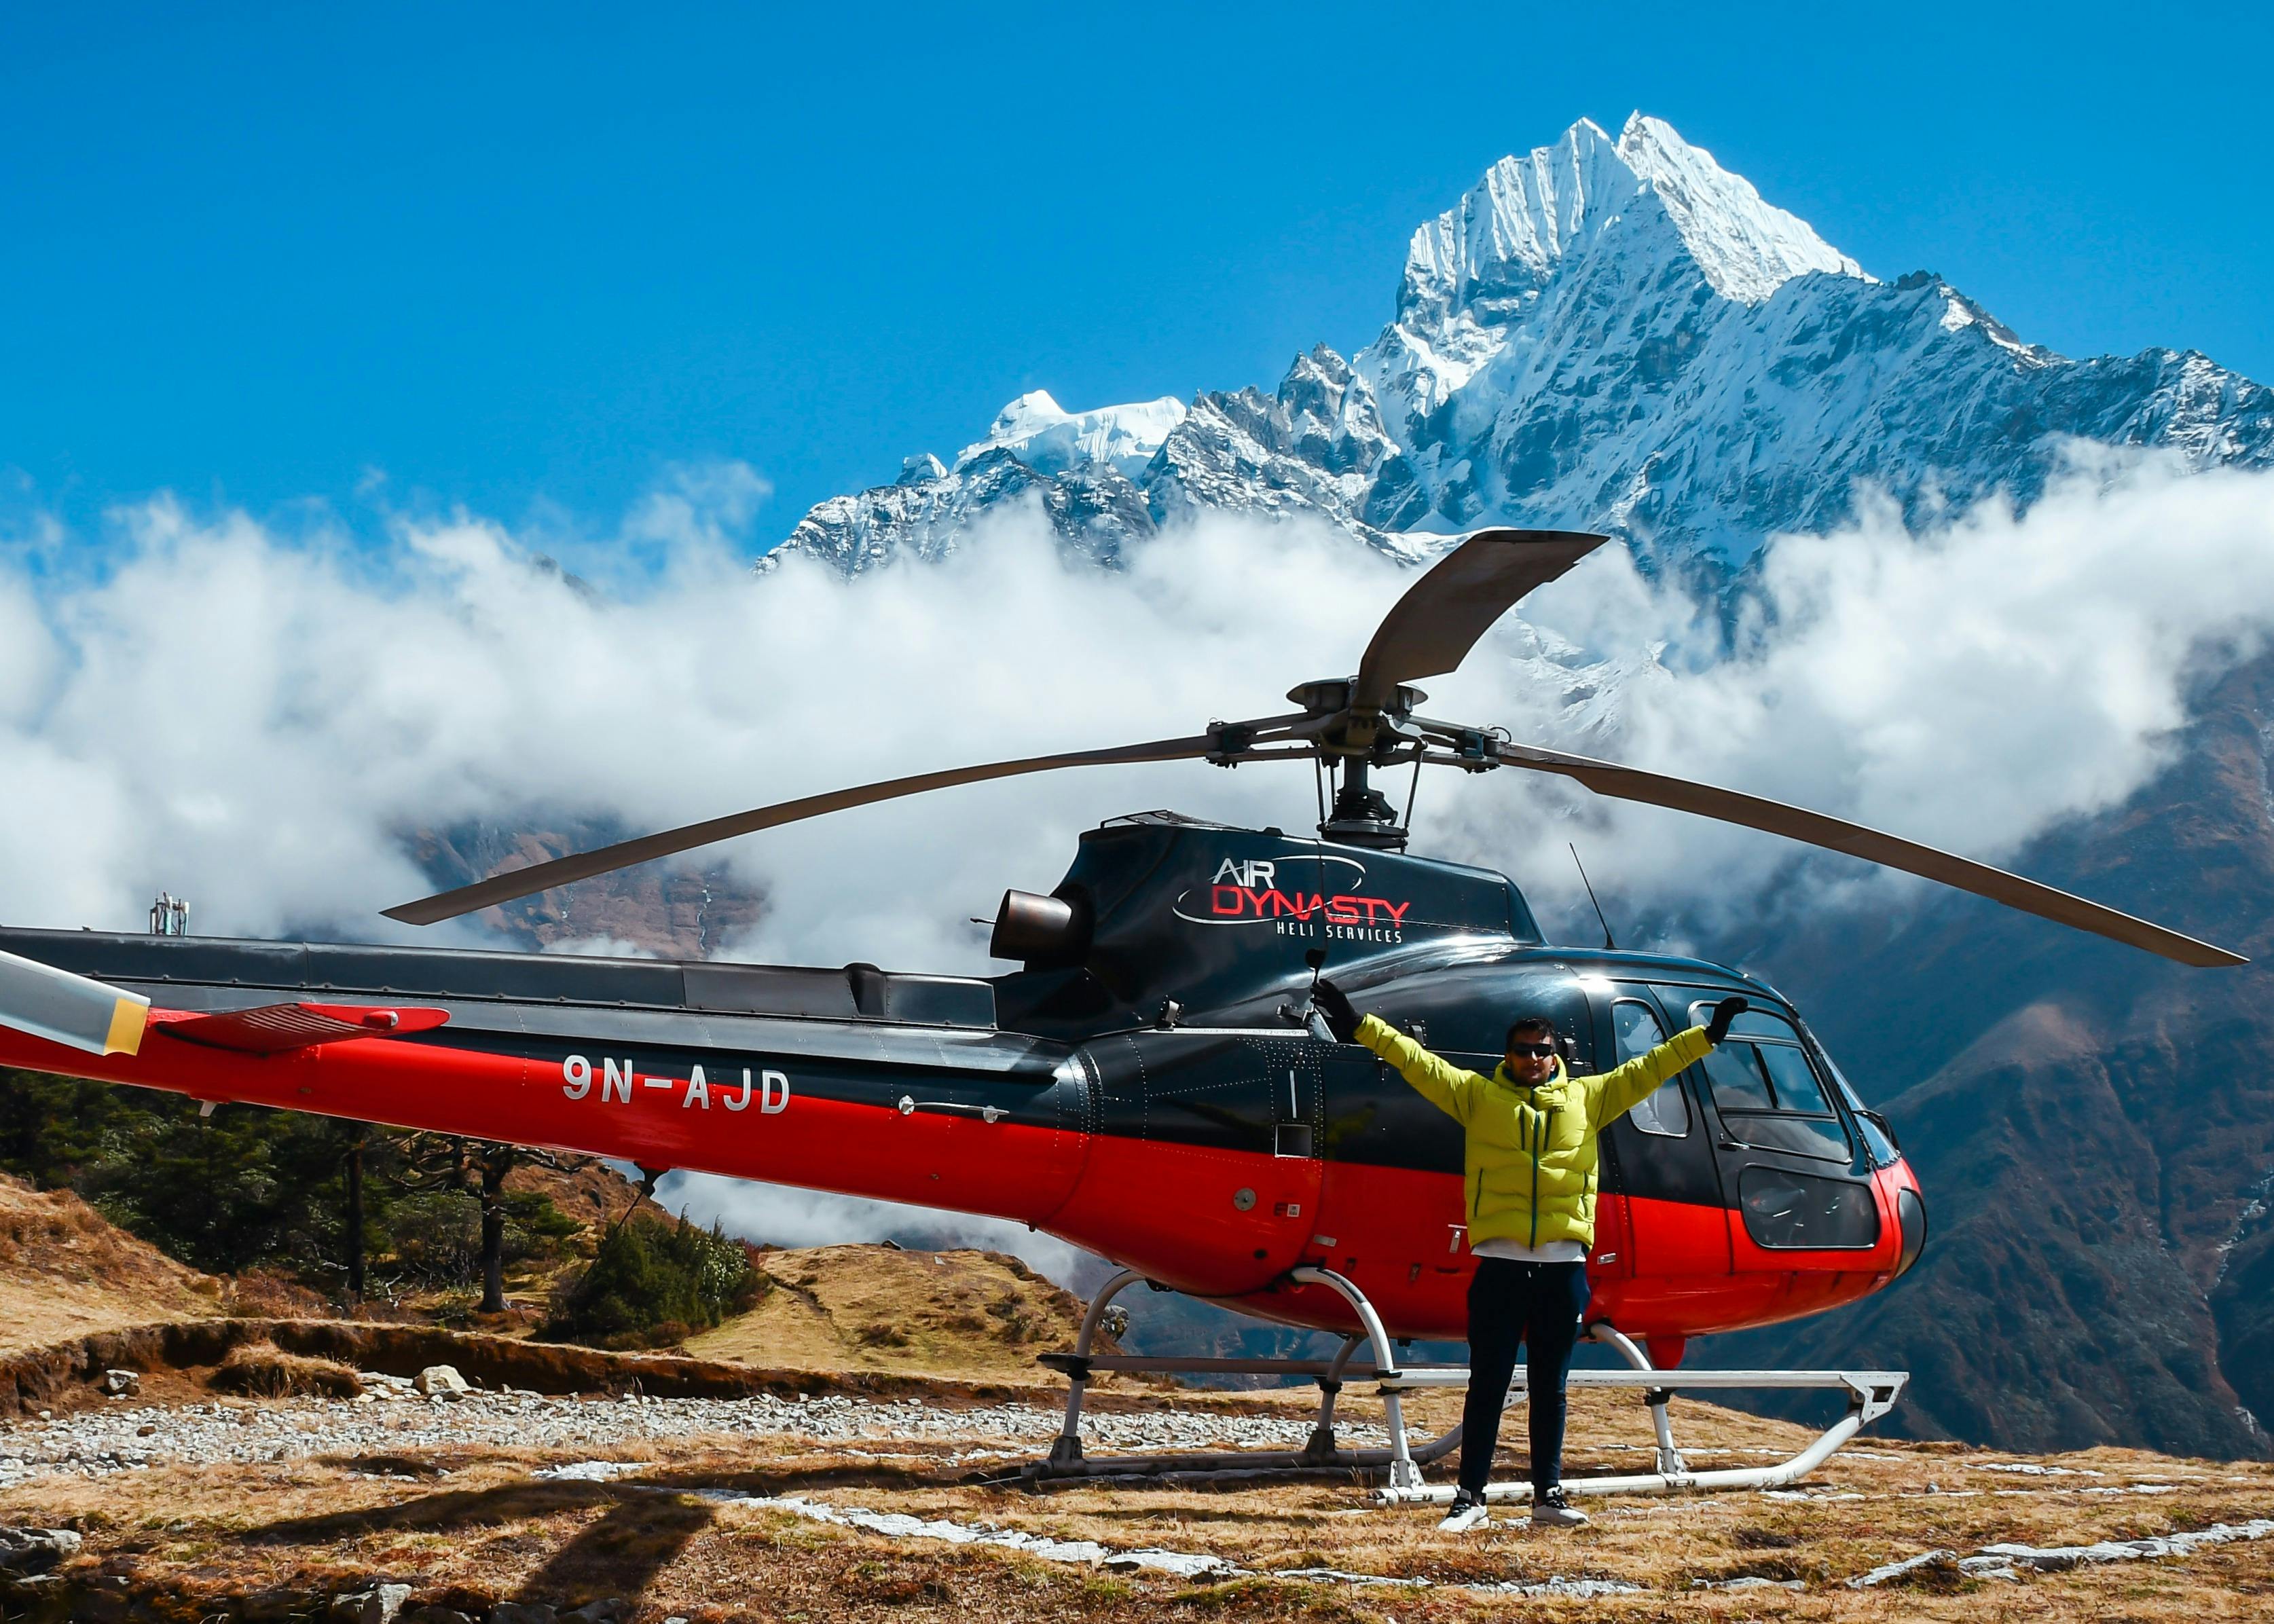 Everest Base Camp with a Helicopter Return: The Complete Guide